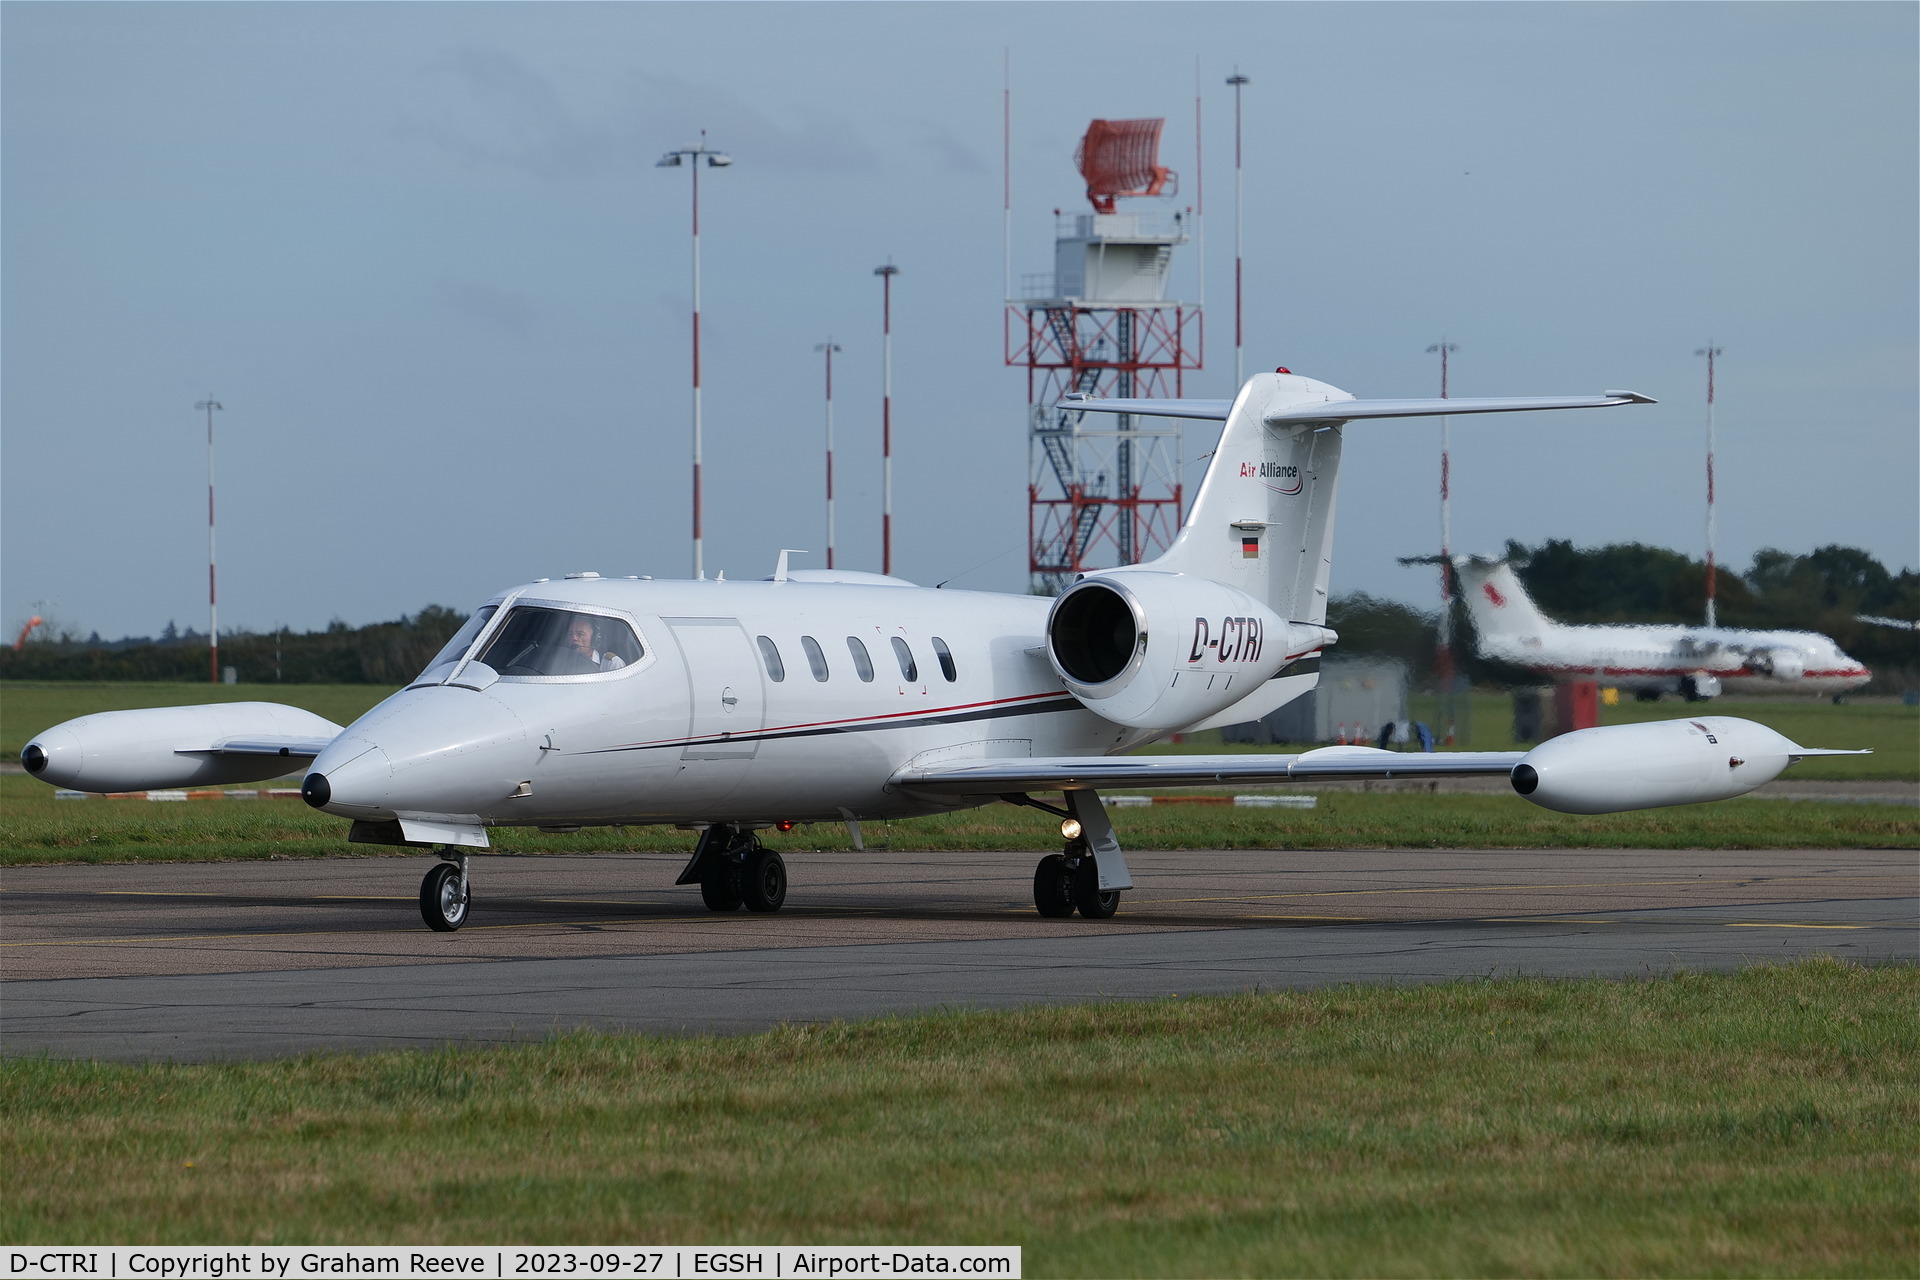 D-CTRI, 1980 Learjet 35A C/N 35A-346, Just landed at Norwich.